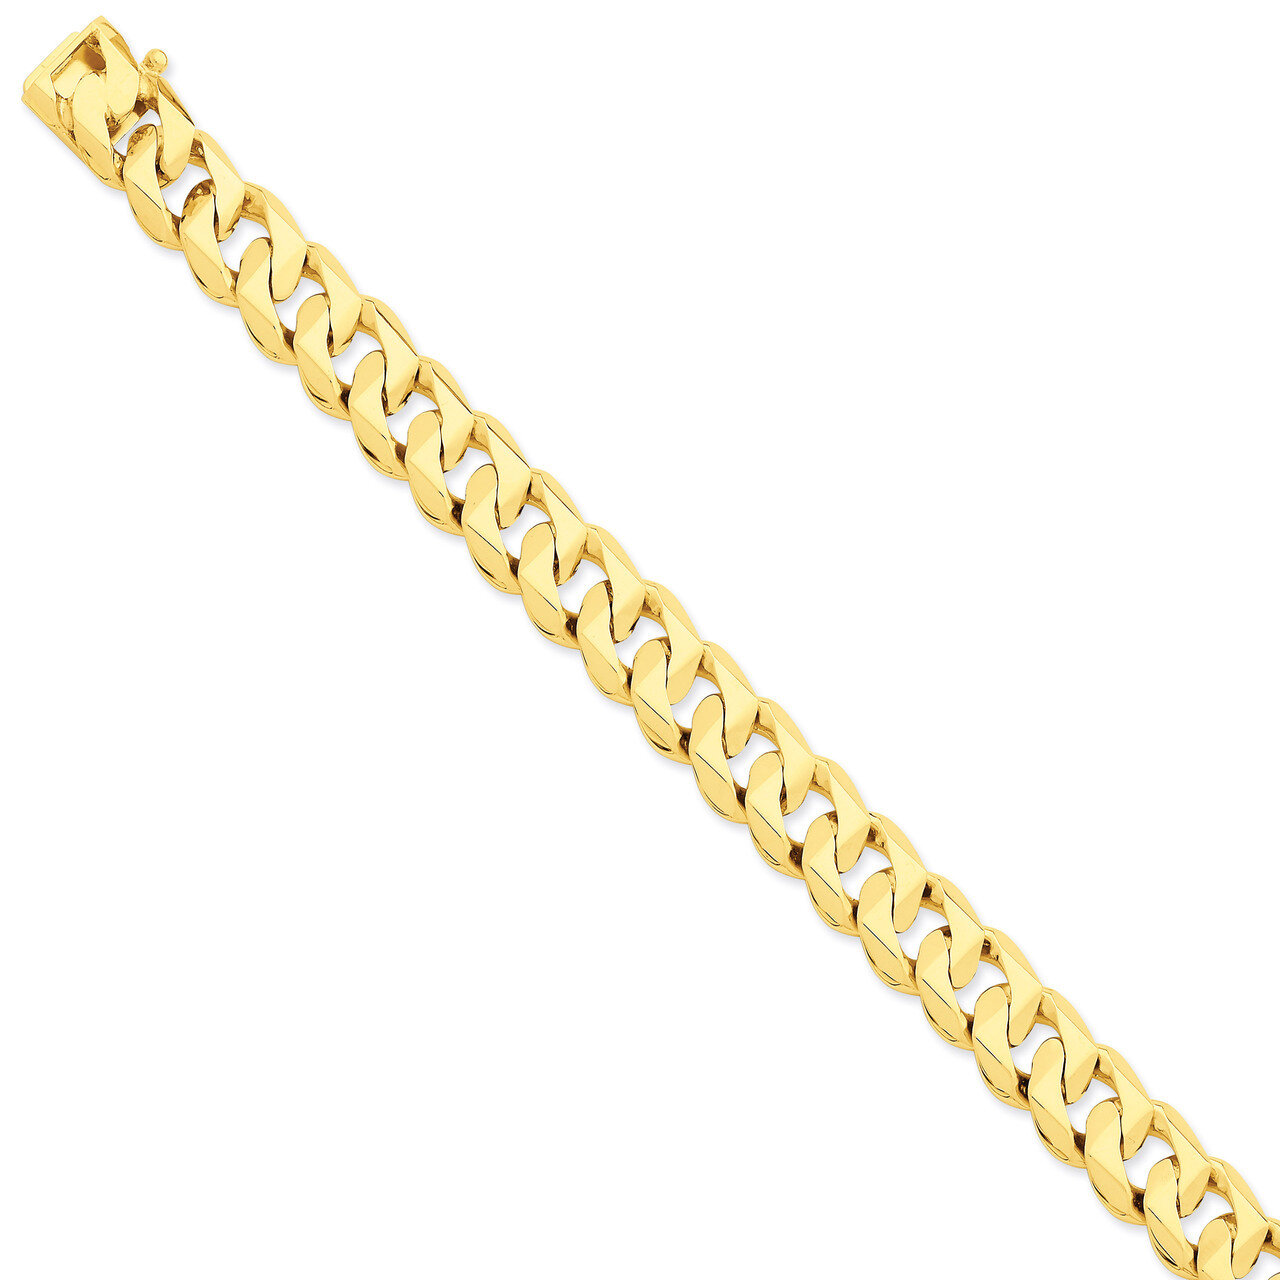 11mm Hand-polished Traditional Link Chain 22 Inch 14k Gold LK120-22